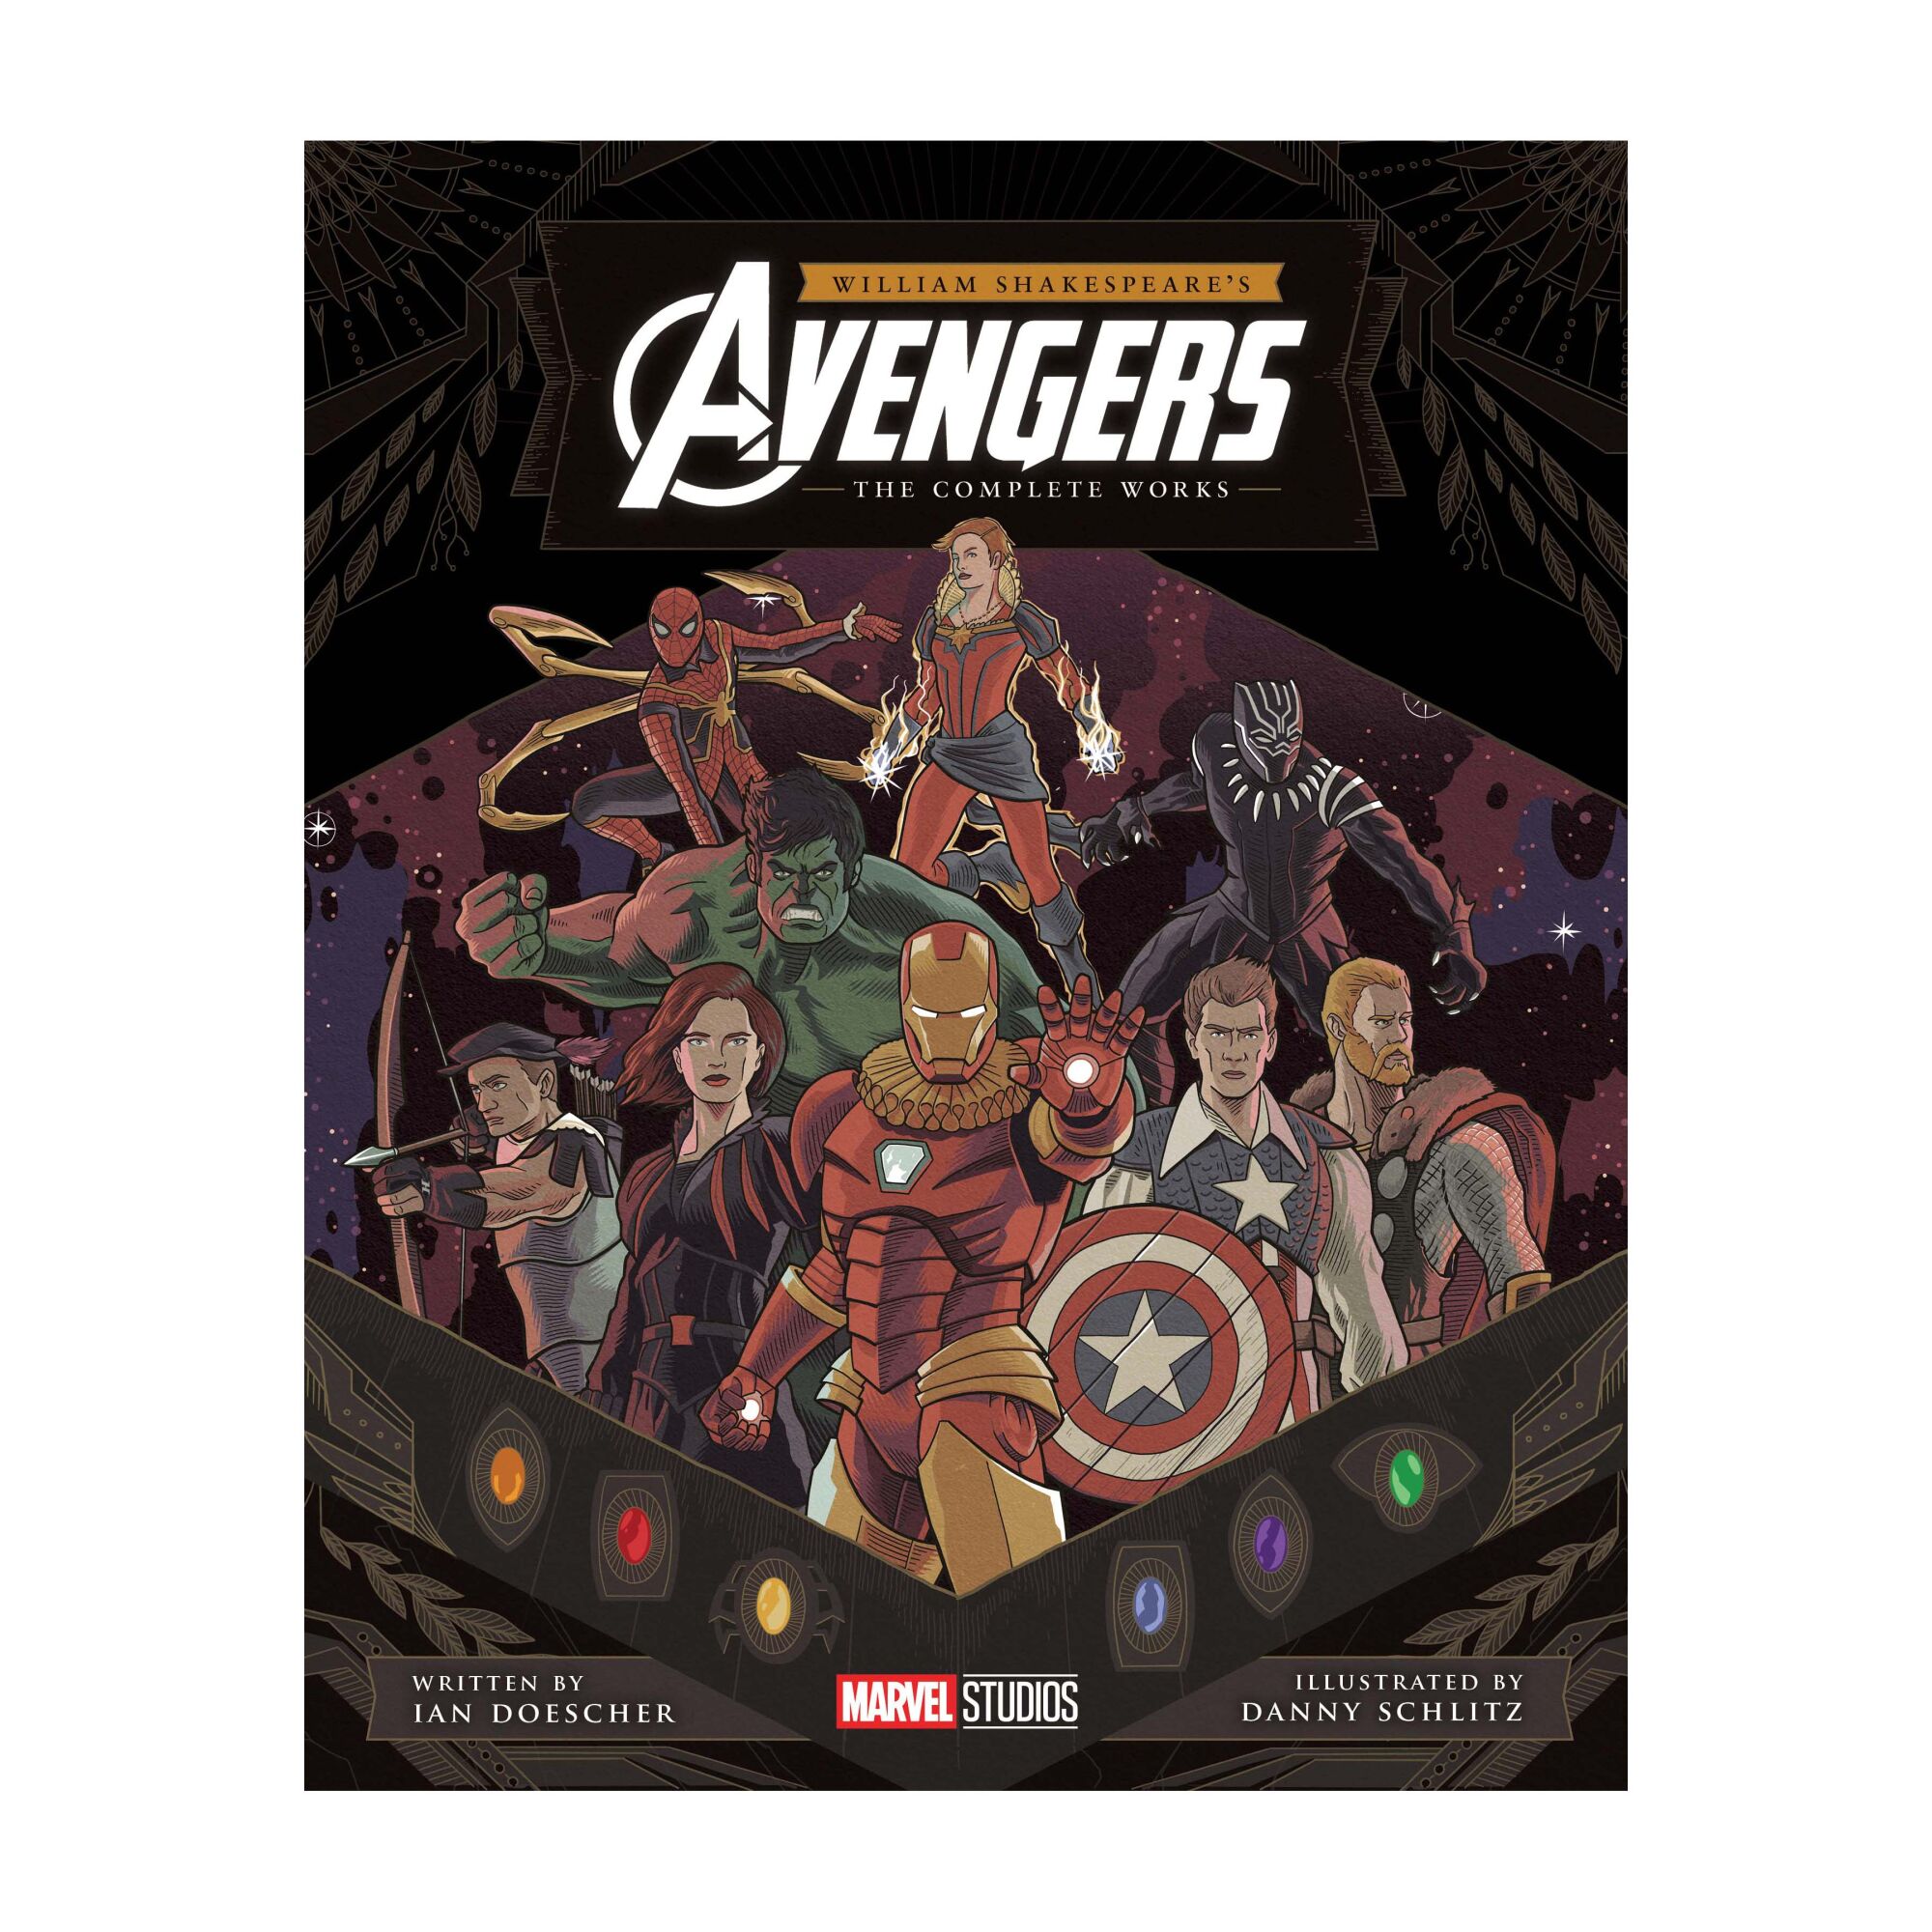 "William Shakespeare's Avengers: The Complete Works" cover